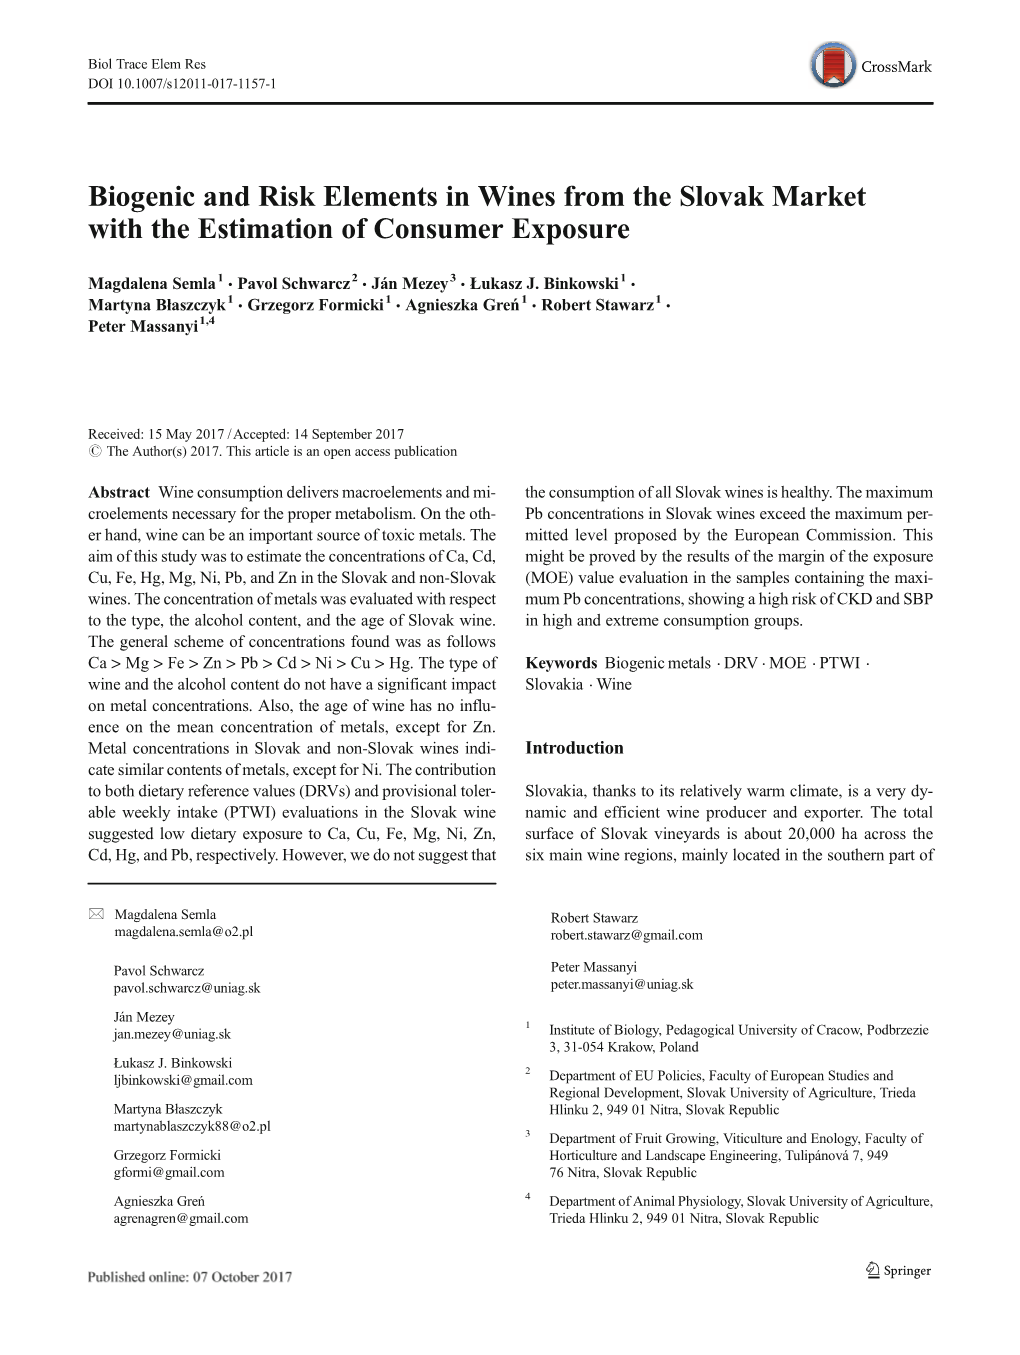 Biogenic and Risk Elements in Wines from the Slovak Market with the Estimation of Consumer Exposure